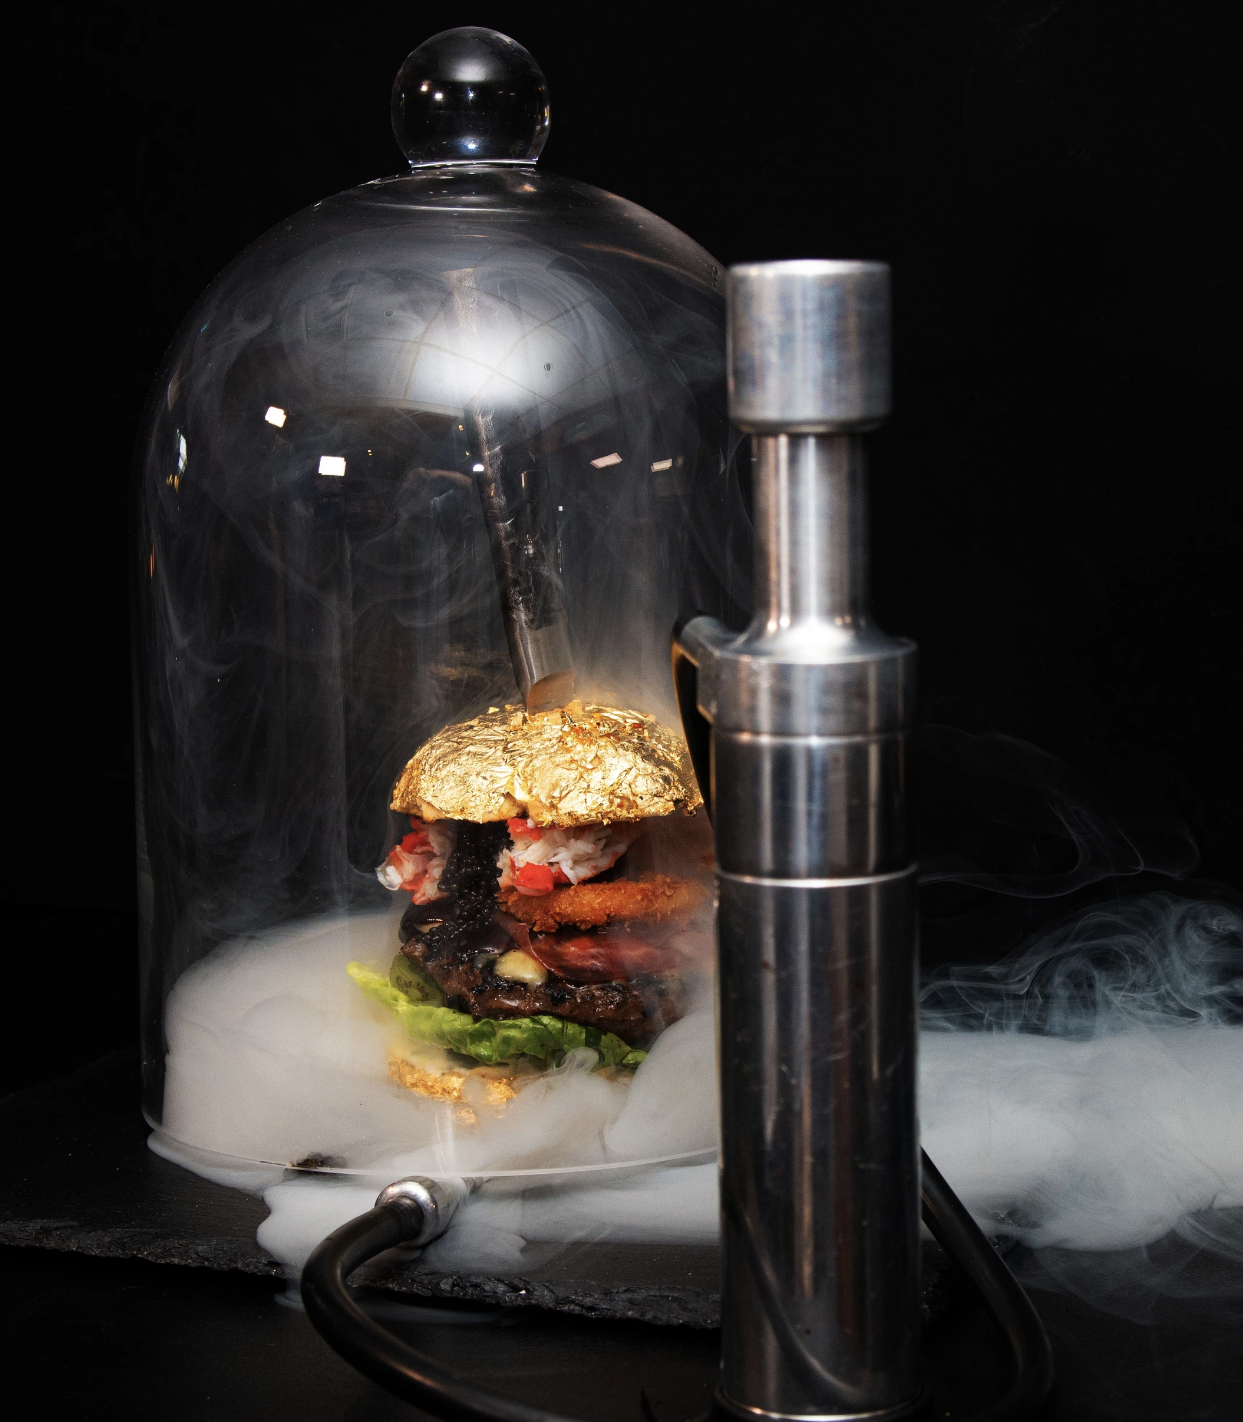 While you can usually get a decent burger for a dollar or so while on the fly, De Dalton’s Golden Boy burger is the ultimate splurge. Worth €5,000 ($5,312.55 USD), the burger is comprised of “100 percent Wagyu A5 meat including Beluga caviar, king crab, Spanish Paleta Ibérico, white truffle, English cheddar and barbecue sauce made with Kopi Luwak coffee and Scottish Macallan whisky,” per its menu listing. Its bun is made in house, infused with Dom Pérignon and covered with gold leaf.